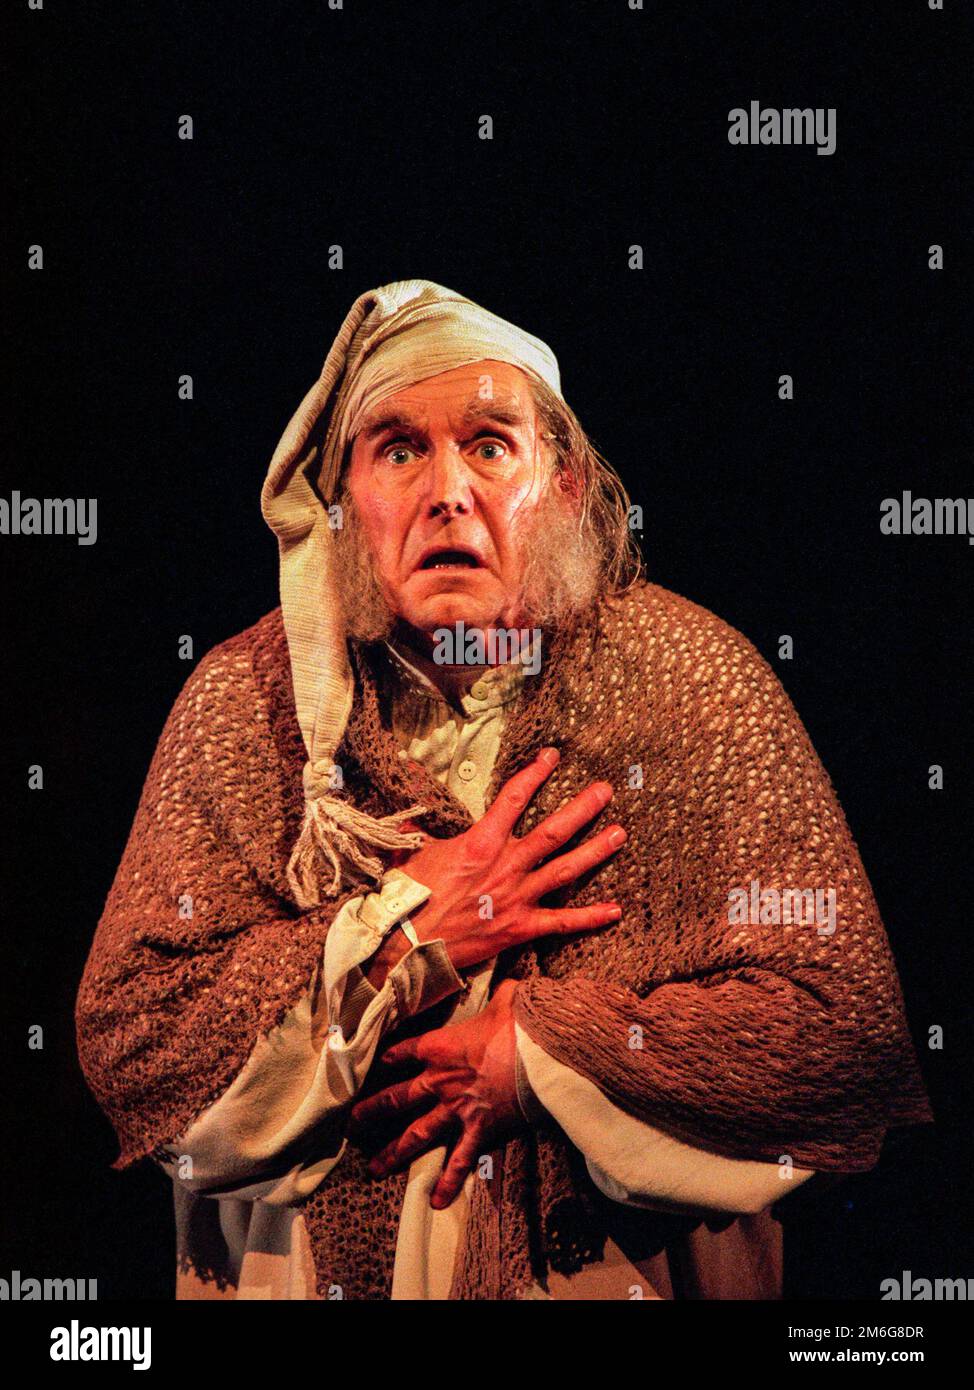 Clive Francis (Ebenezer Scrooge) in A CHRISTMAS CAROL by Charles Dickens at the Royal Shakespeare Company (RSC), Barbican Theatre, Barbican Centre, London EC2  07/12/1995   adapted by John Mortimer  music: Nigel Hess  set design: John Gunter  costumes: Deirdre Clancy  lighting: Nigel Levings  choreography: Lindsay Dolan  director: Ian Judge Stock Photo